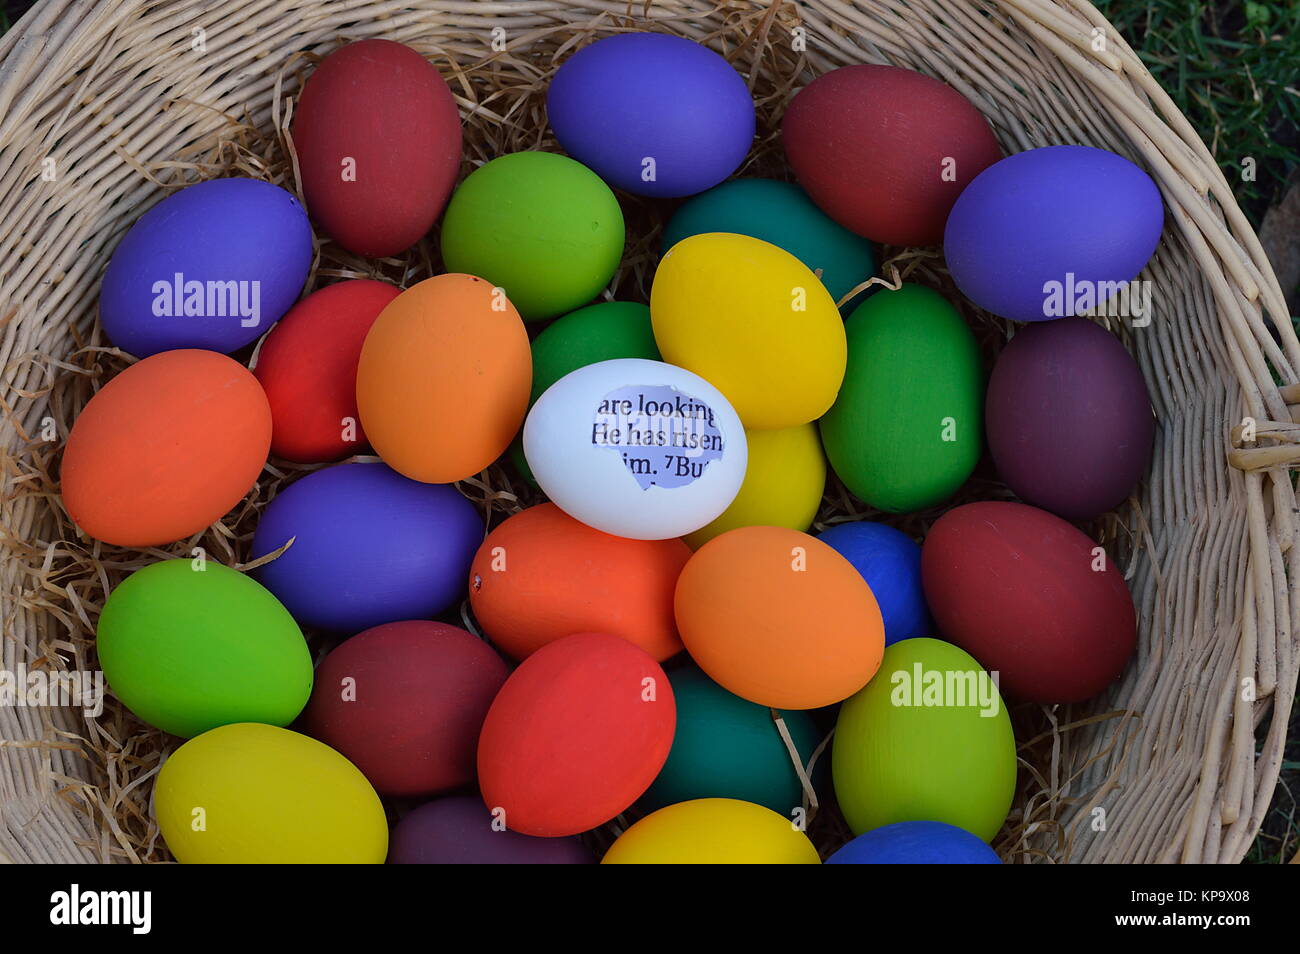 bright white egg with broken shell and Bible text in the words: HE HAS RISEN in the midst of many colorful Easter eggs Stock Photo